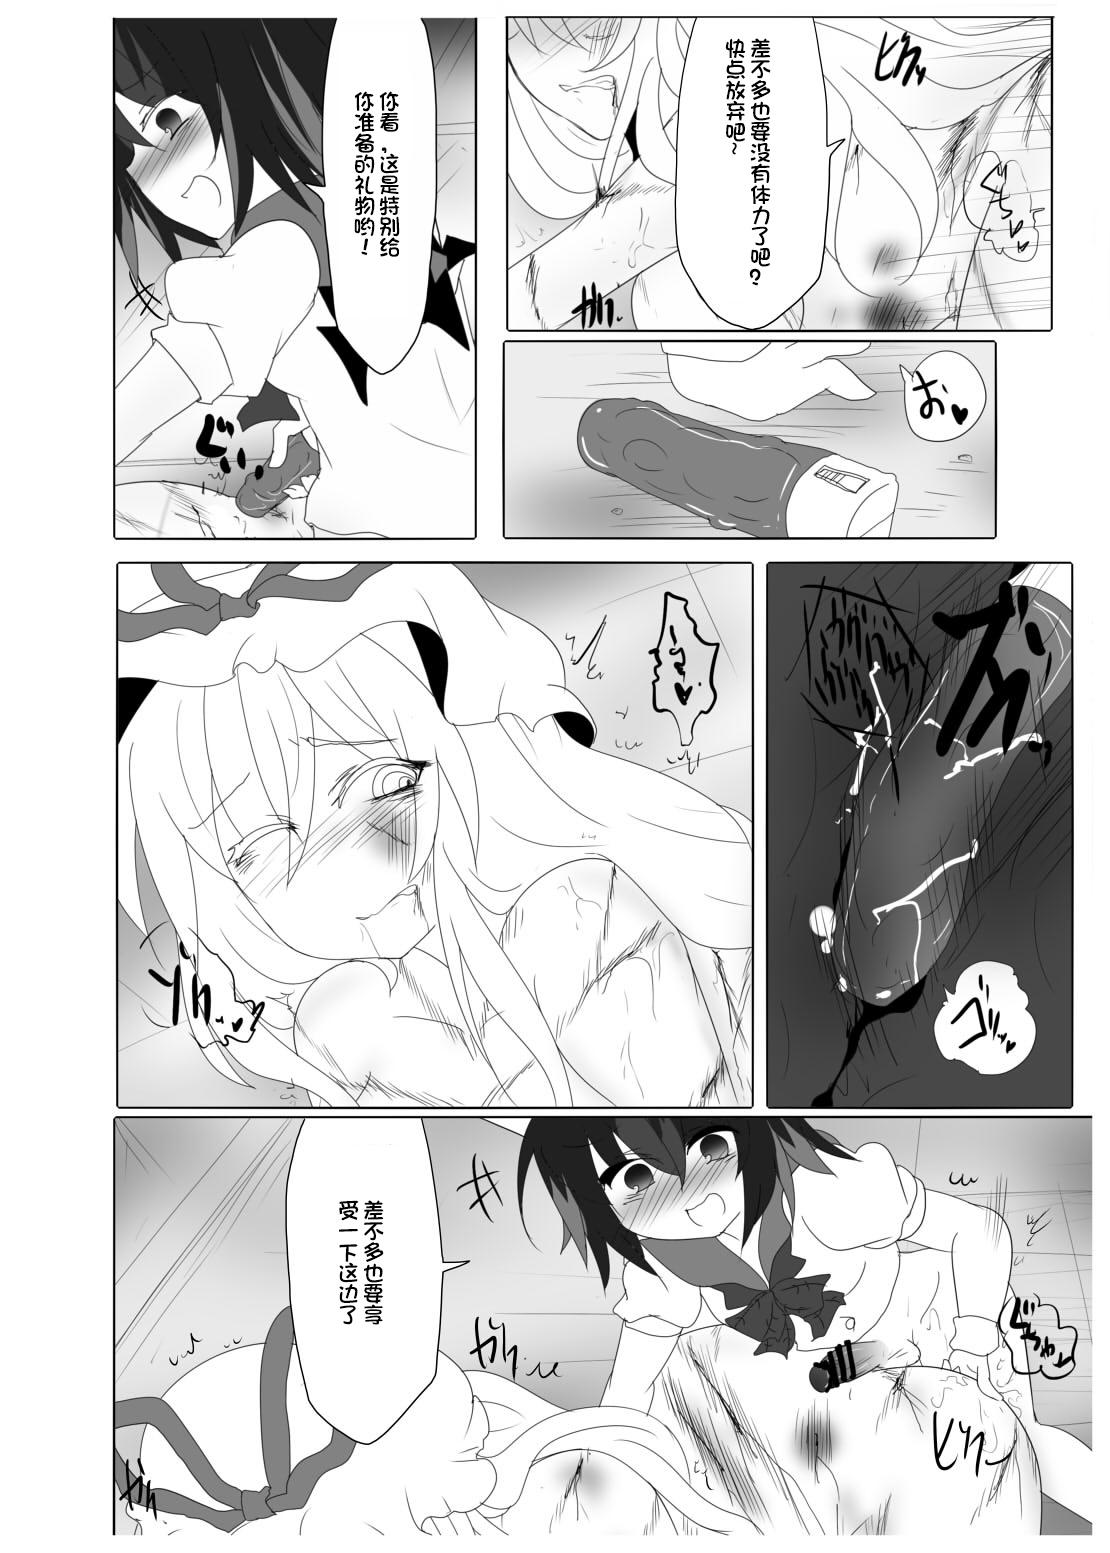 Small Tits Porn 拷問アマノジャクゴールドラッシュ - Touhou project Gay Group - Page 12